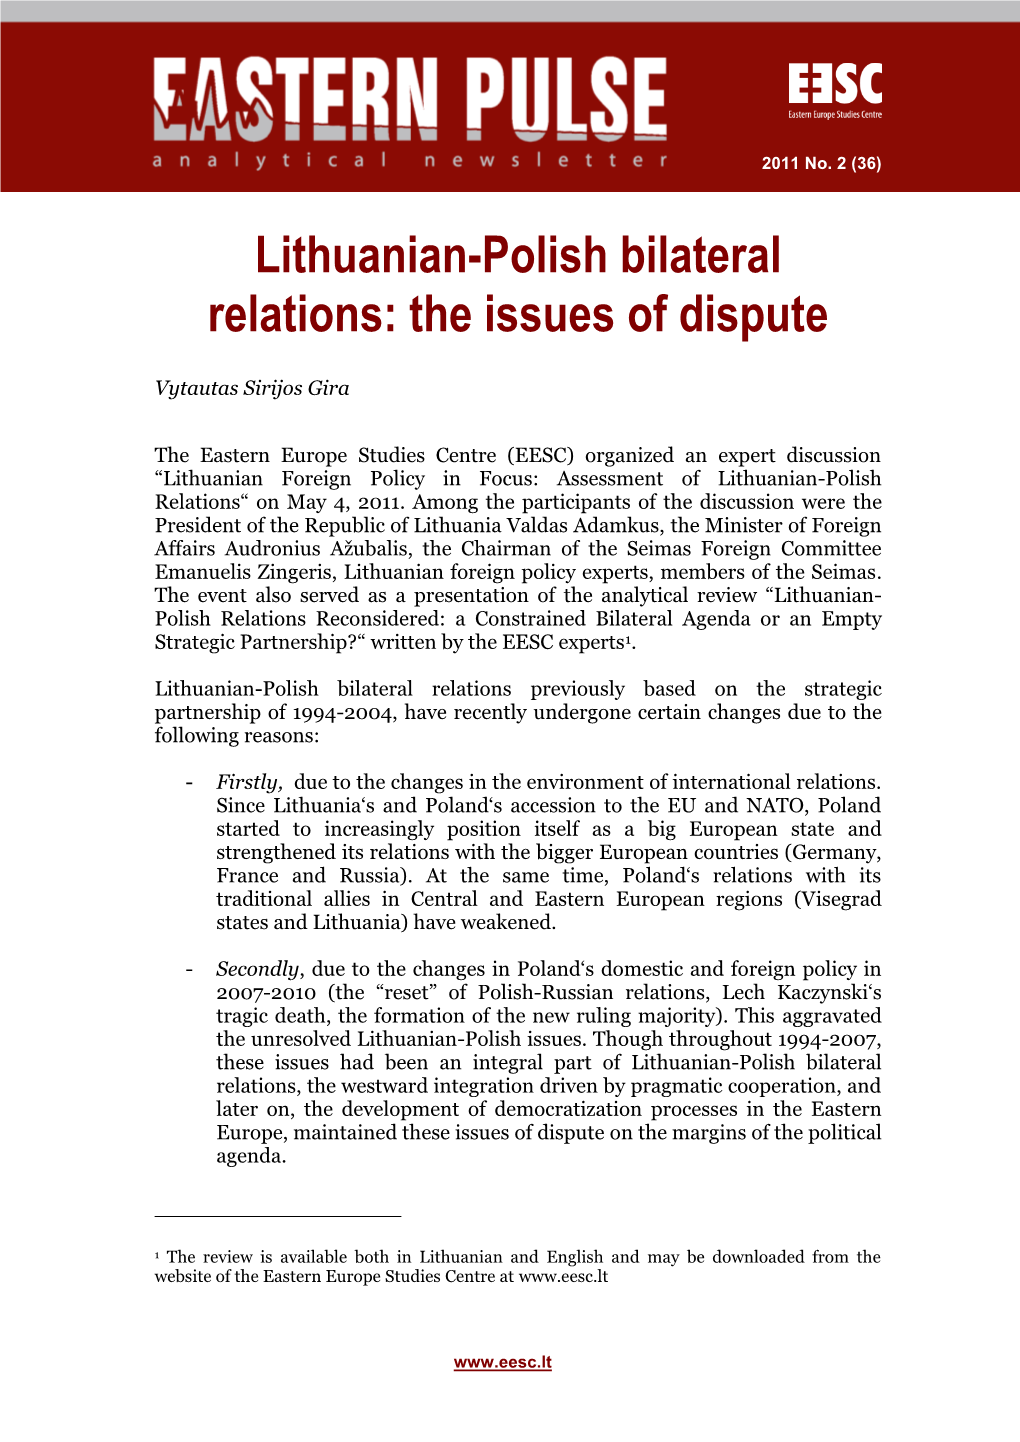 Lithuanian-Polish Bilateral Relations: the Issues of Dispute